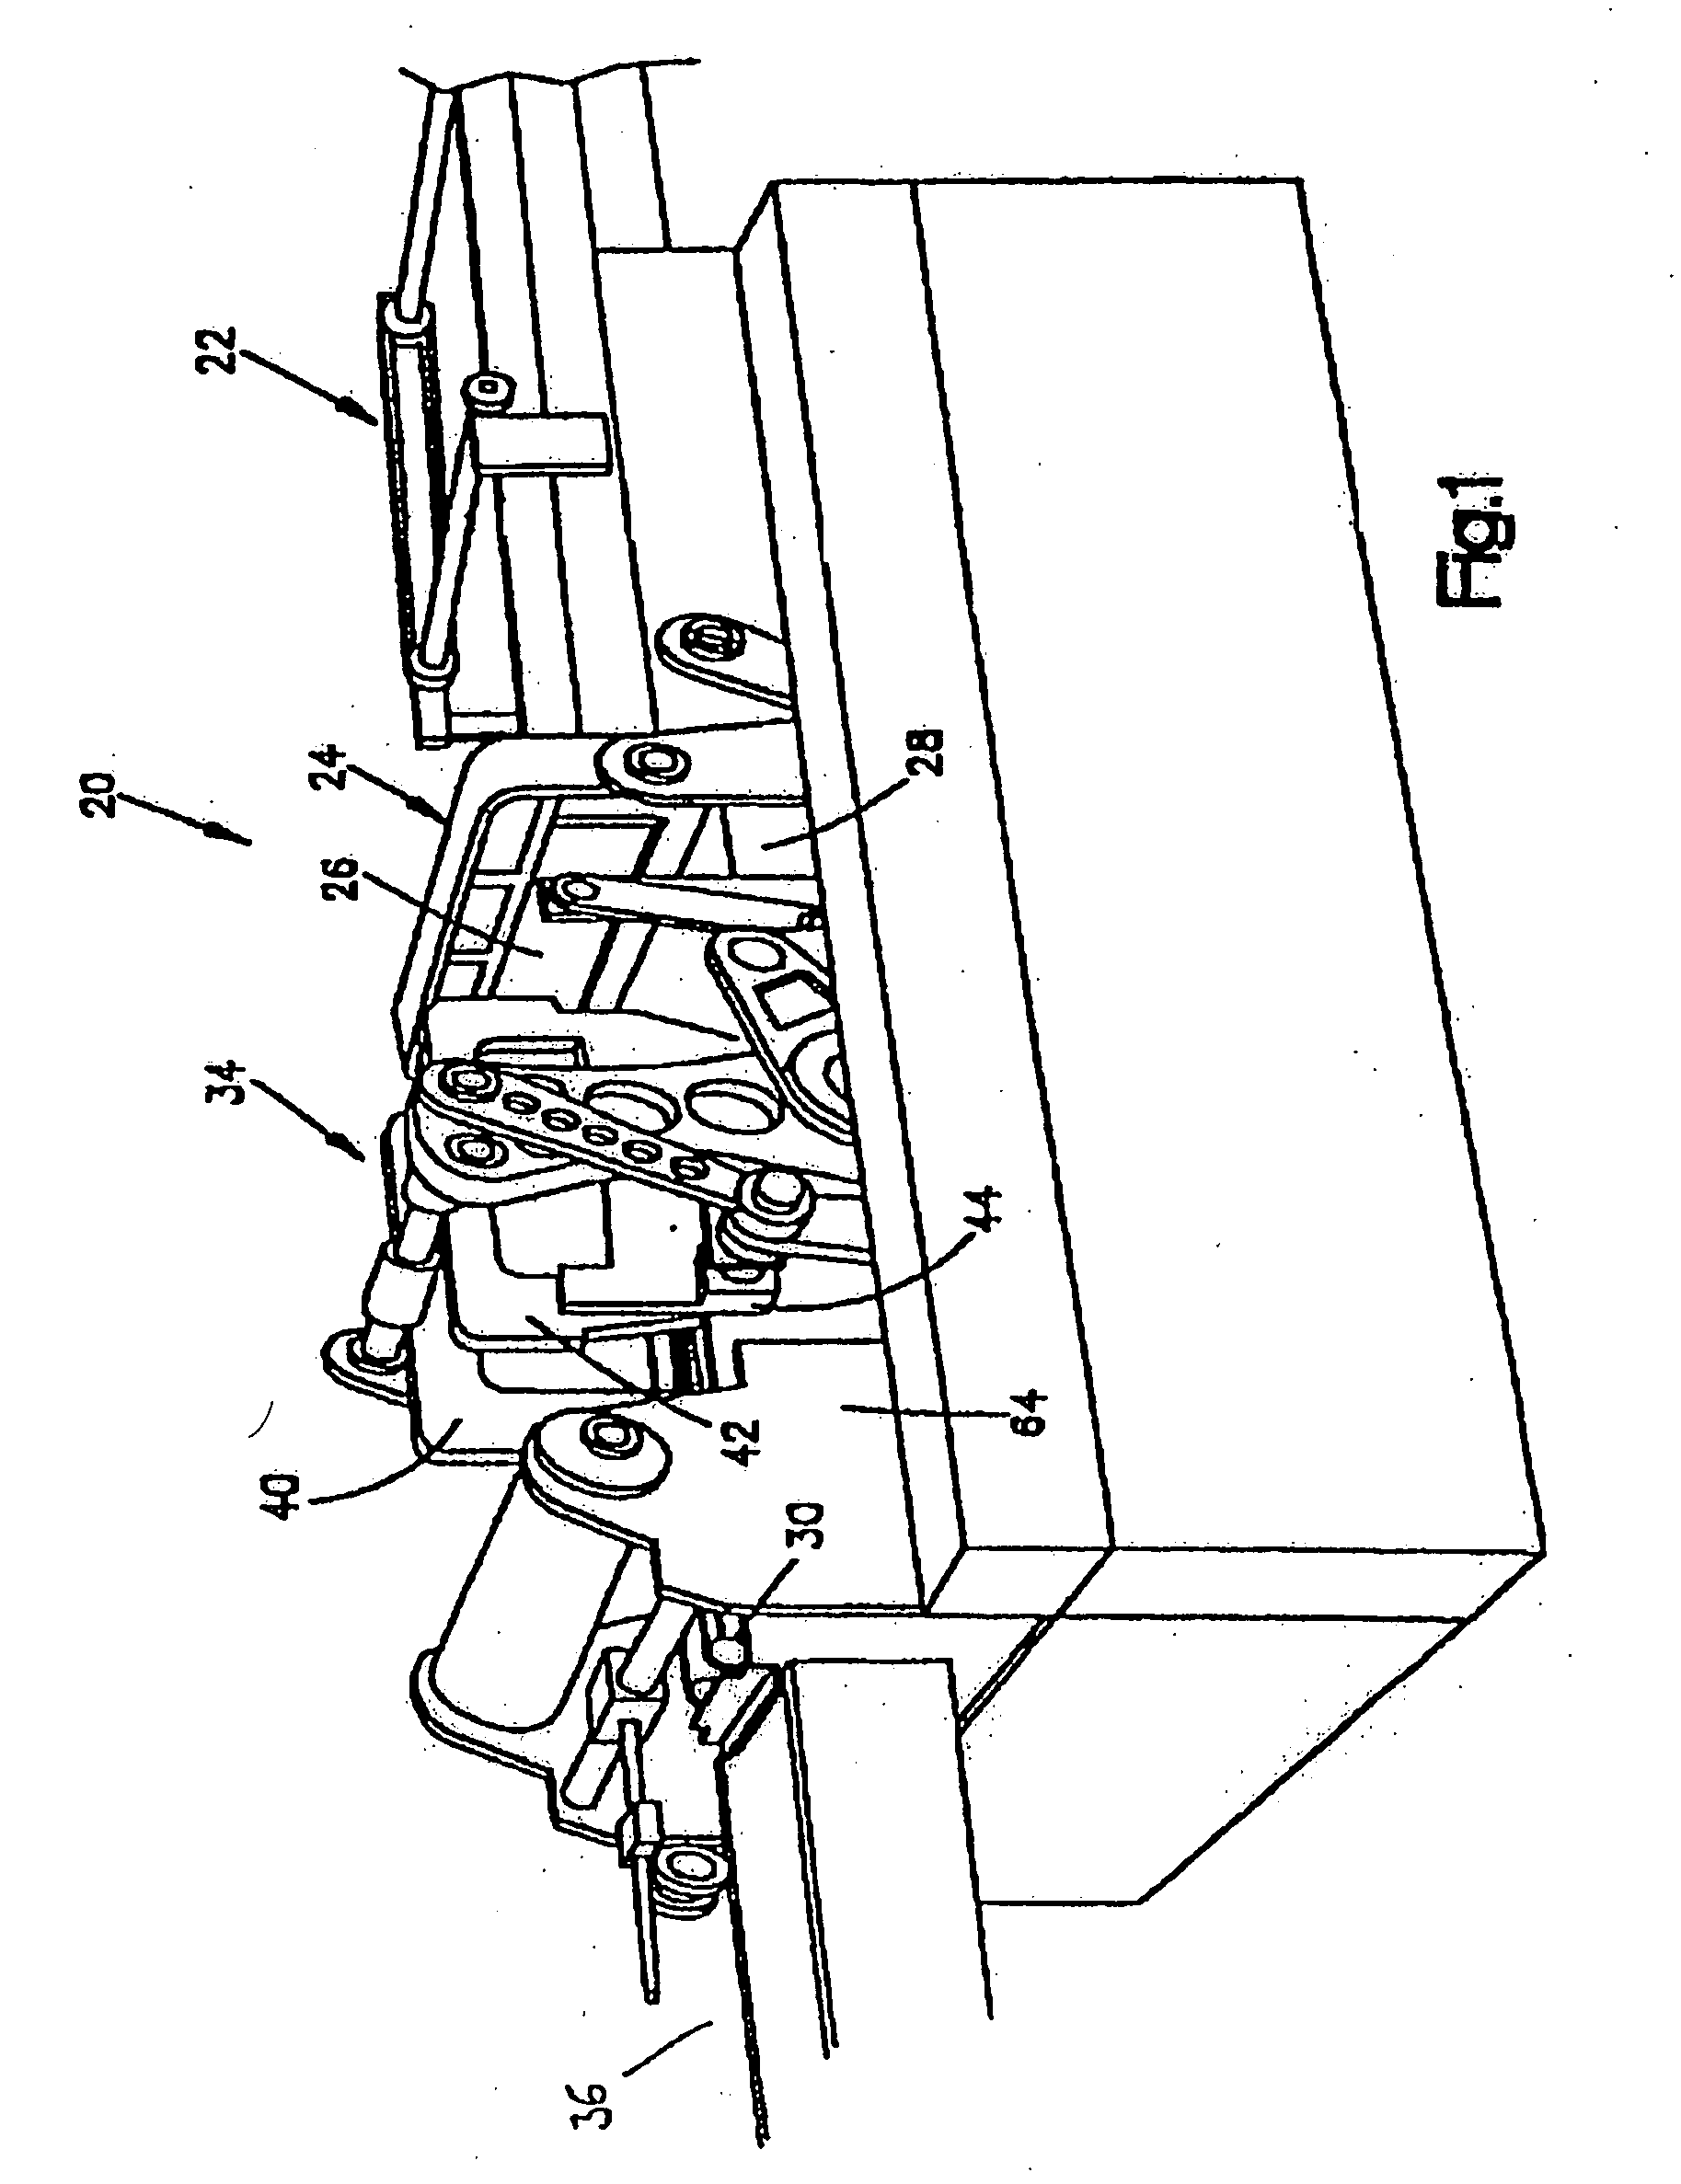 Infeed apparatus for a sheet material article trimmer